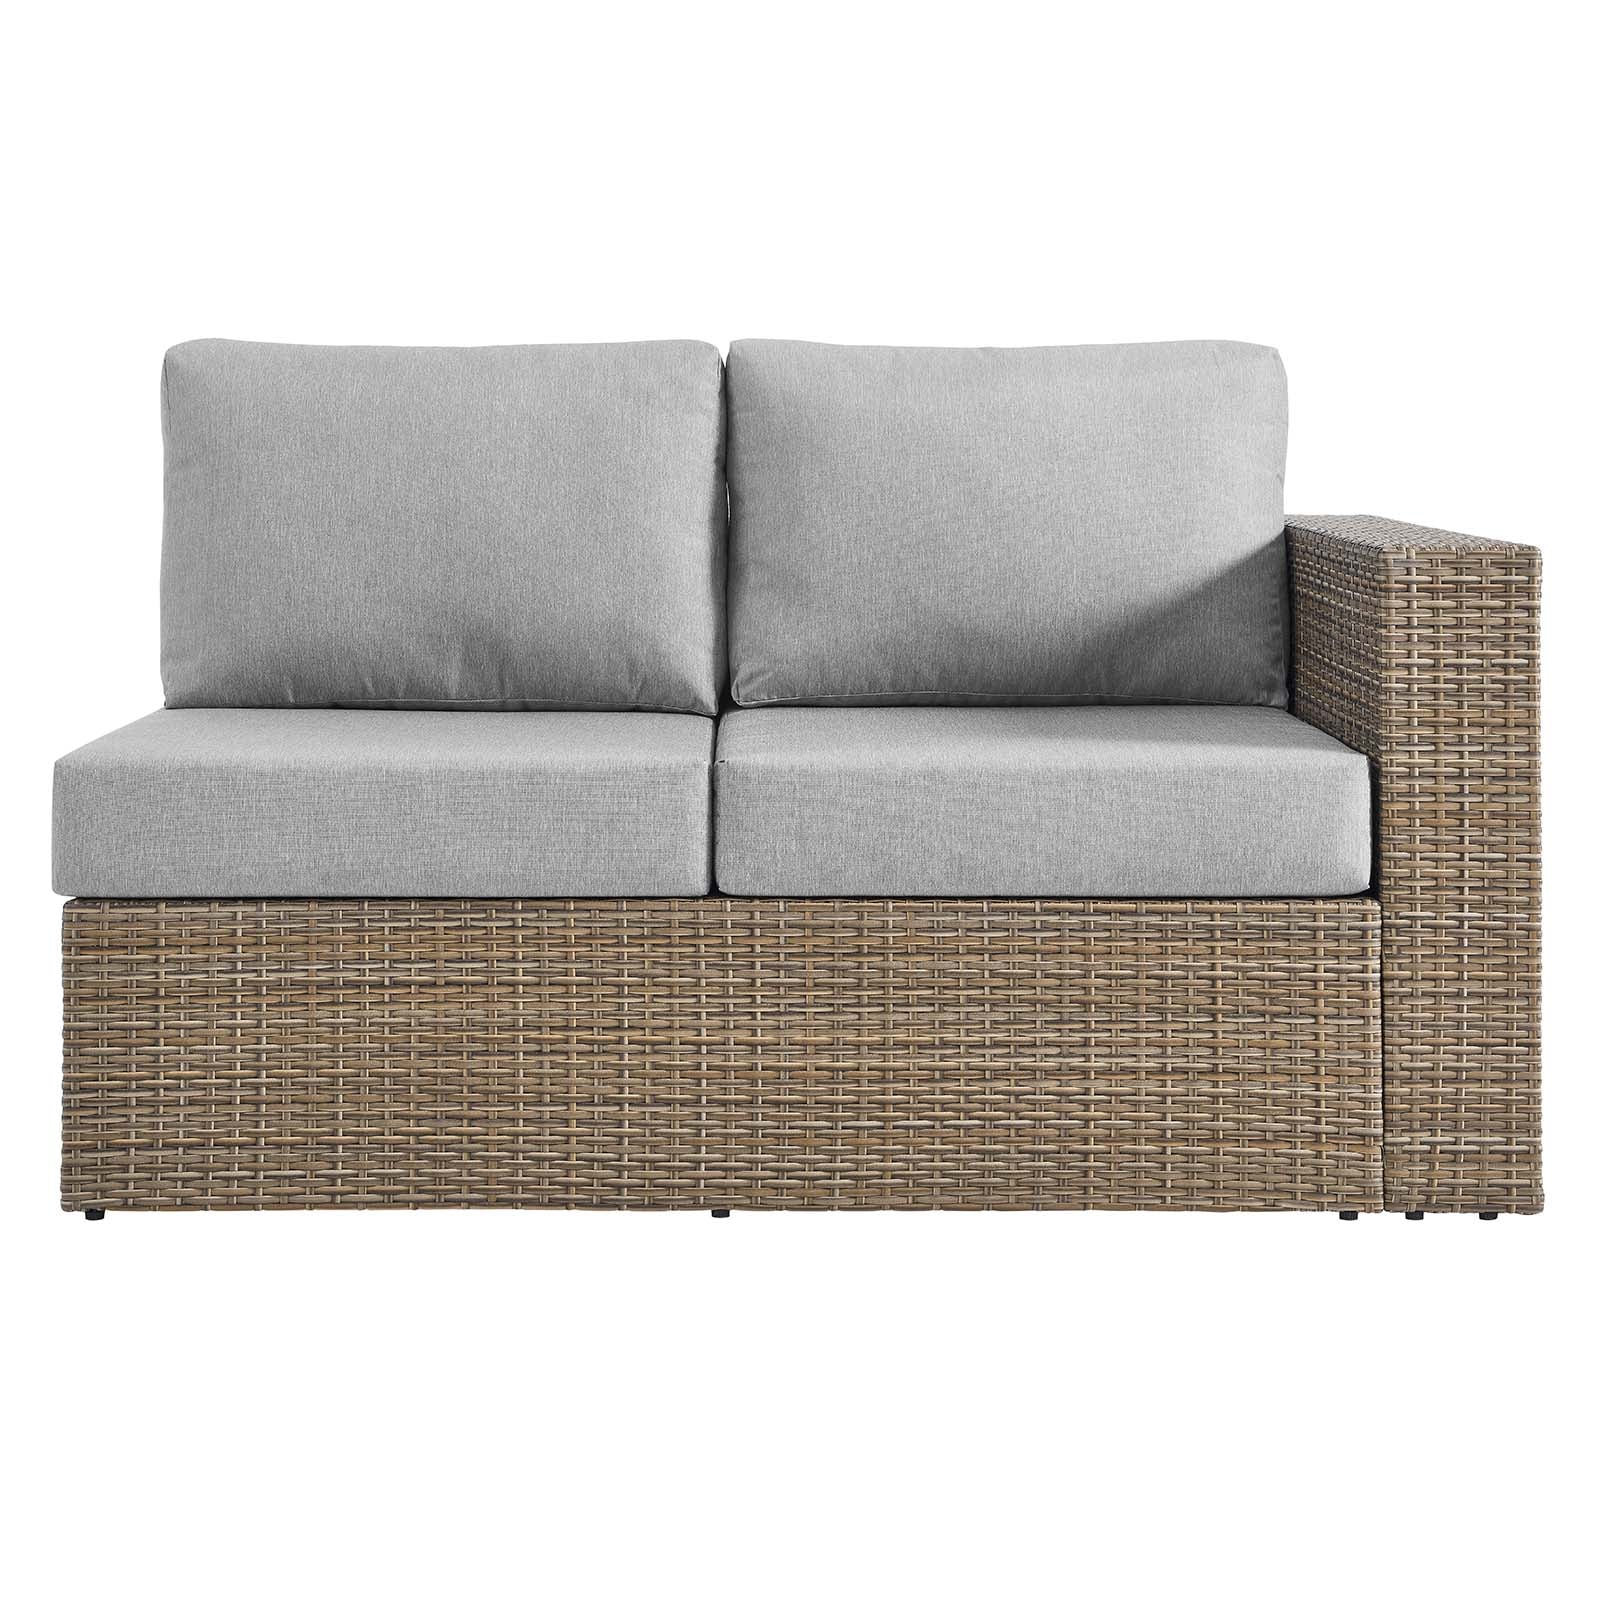 Convene Outdoor Patio Outdoor Patio Sectional Sofa and Ottoman Set - East Shore Modern Home Furnishings